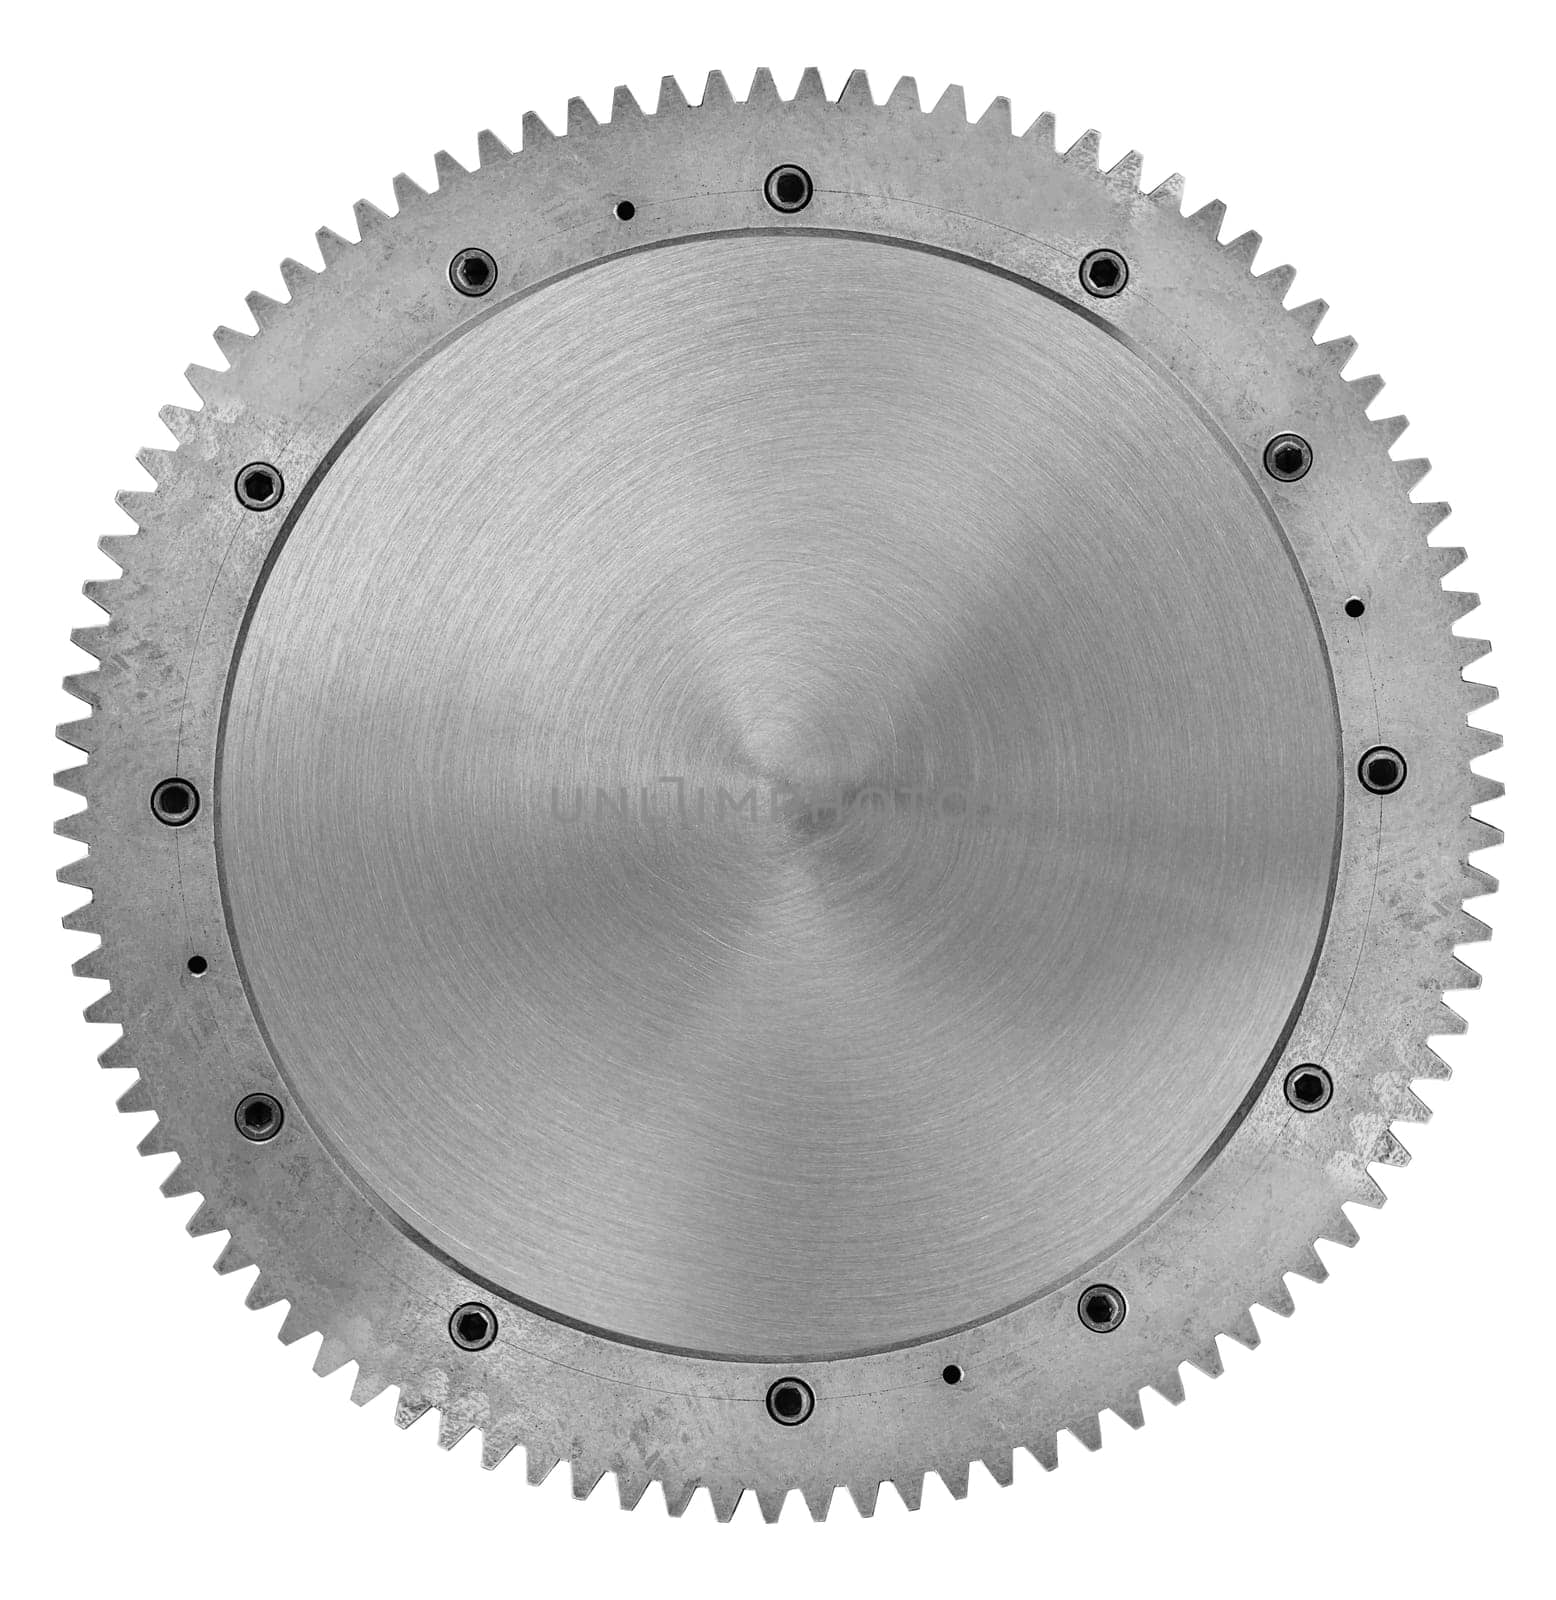 metal toothed gear, on white background, in insulation